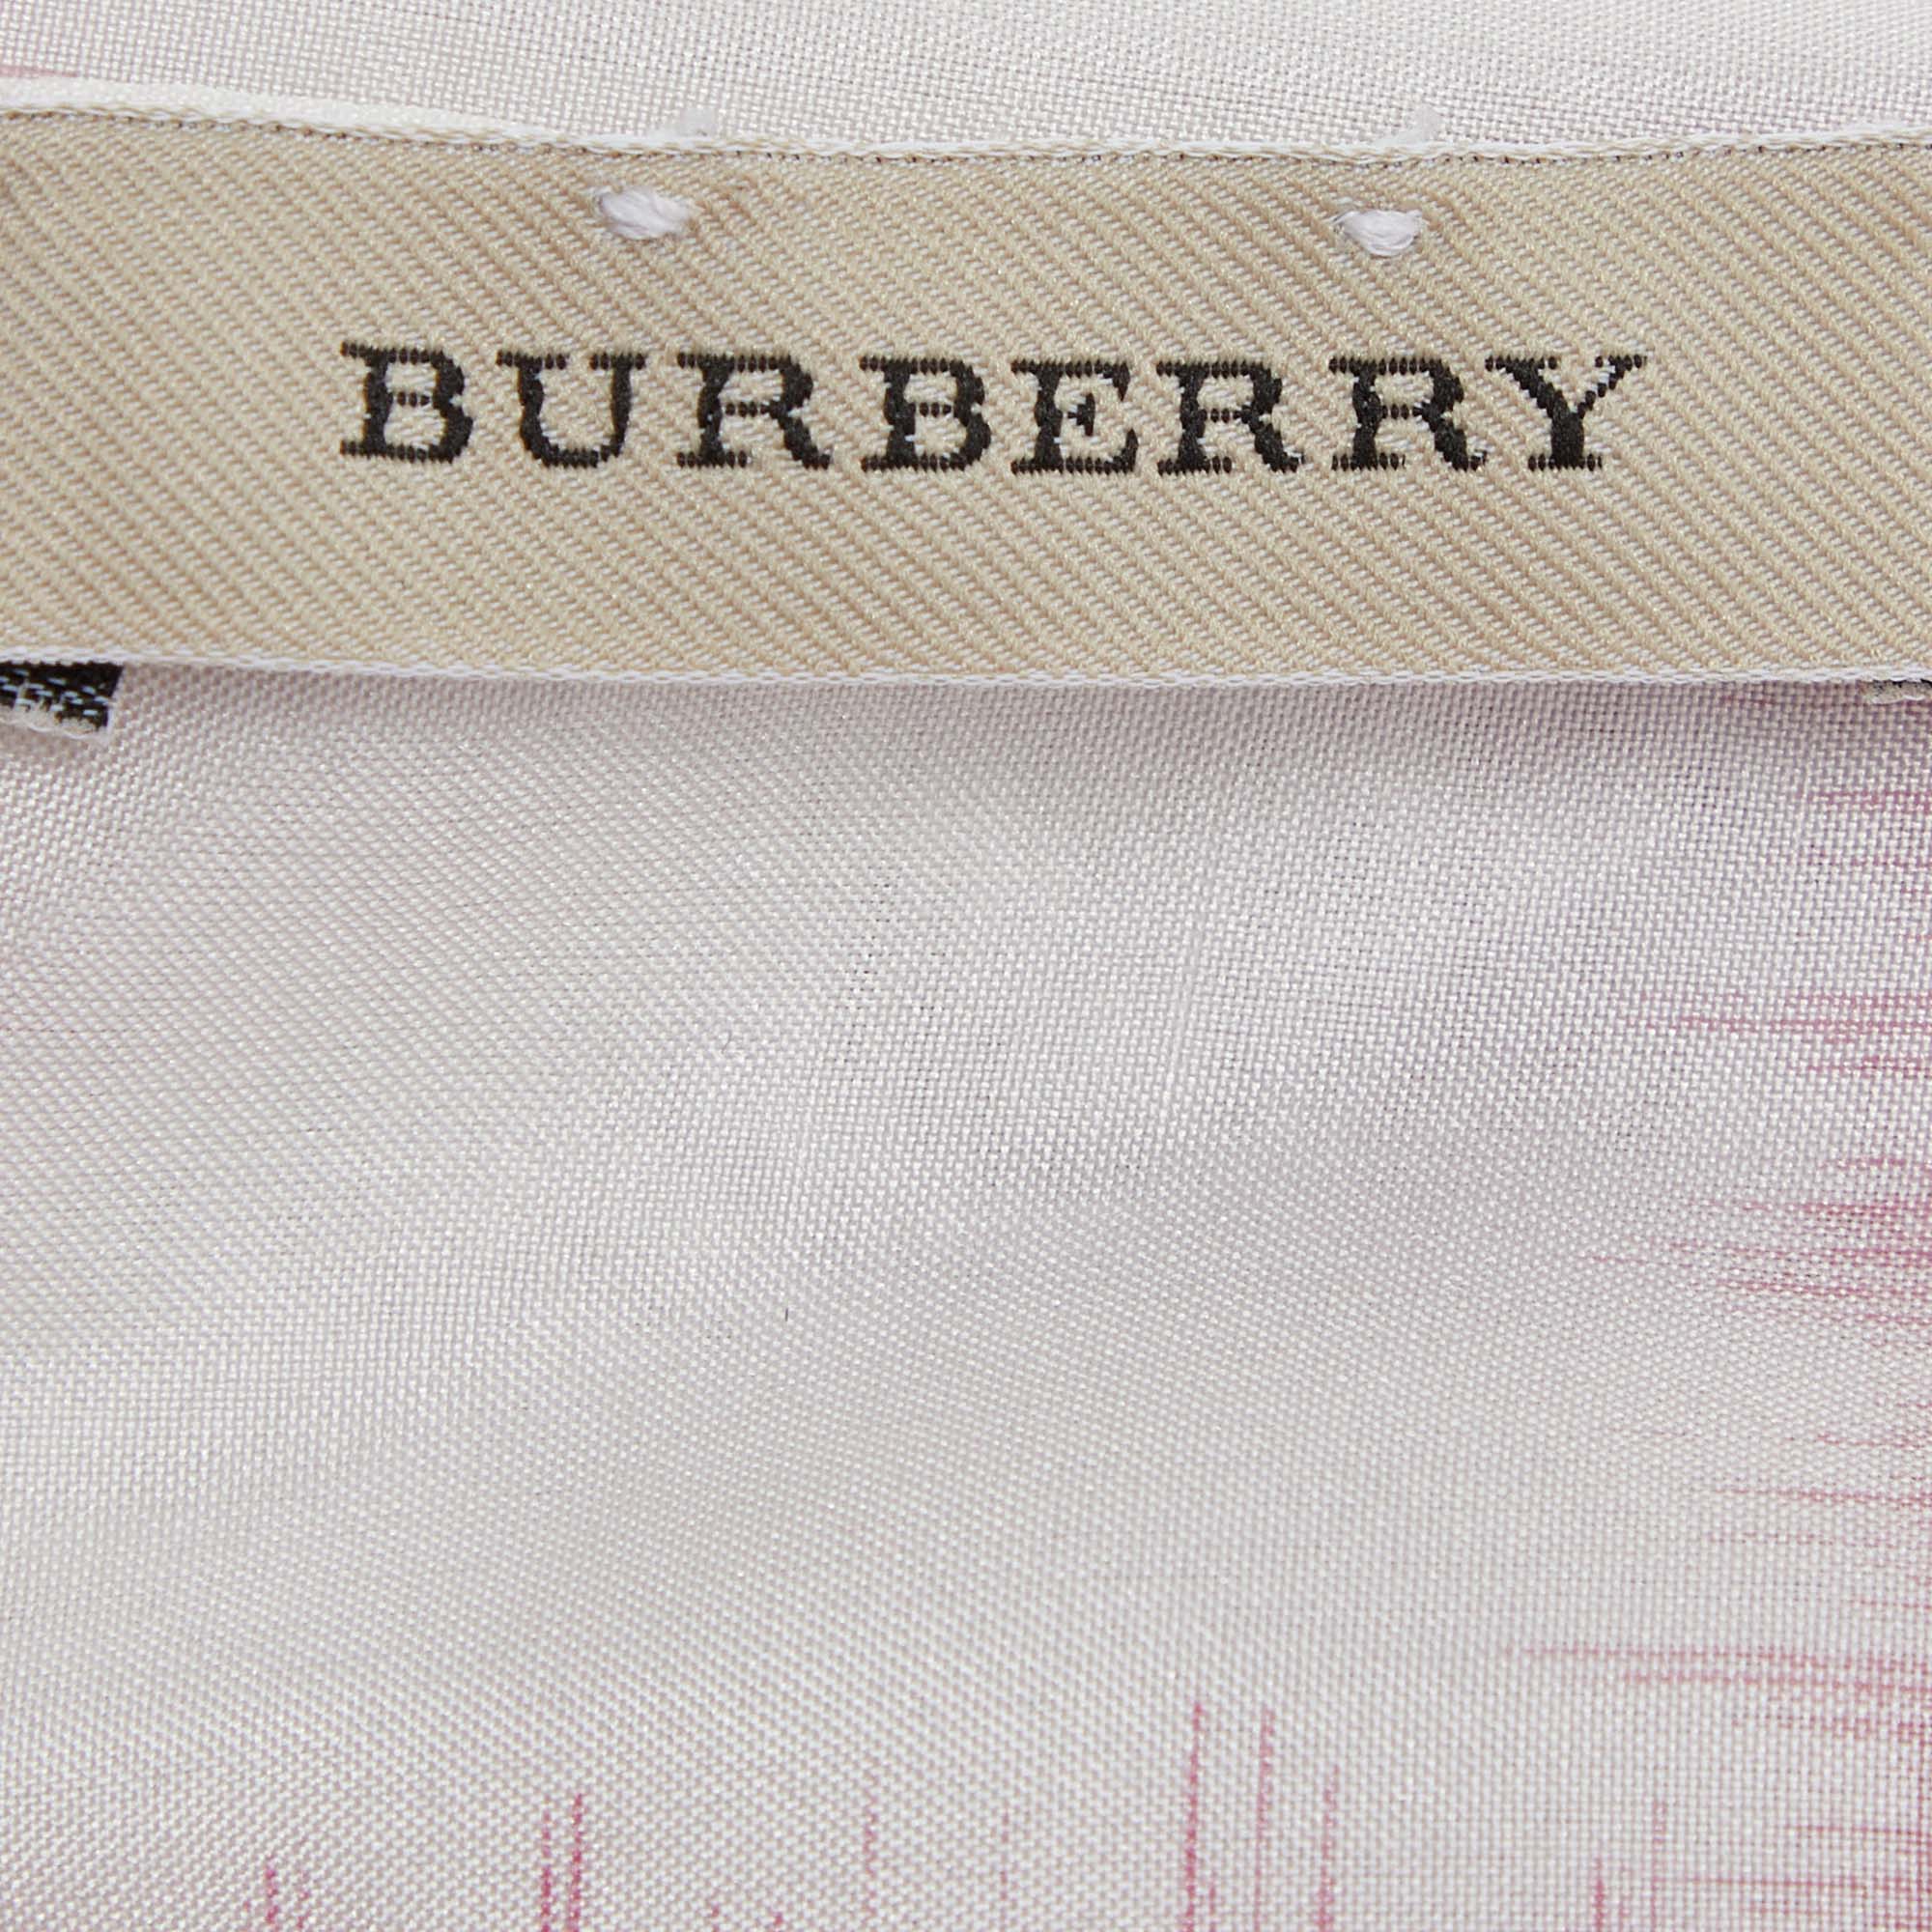 Burberry Vintage Pink/White Horseferry Print Silk Fringed Scarf